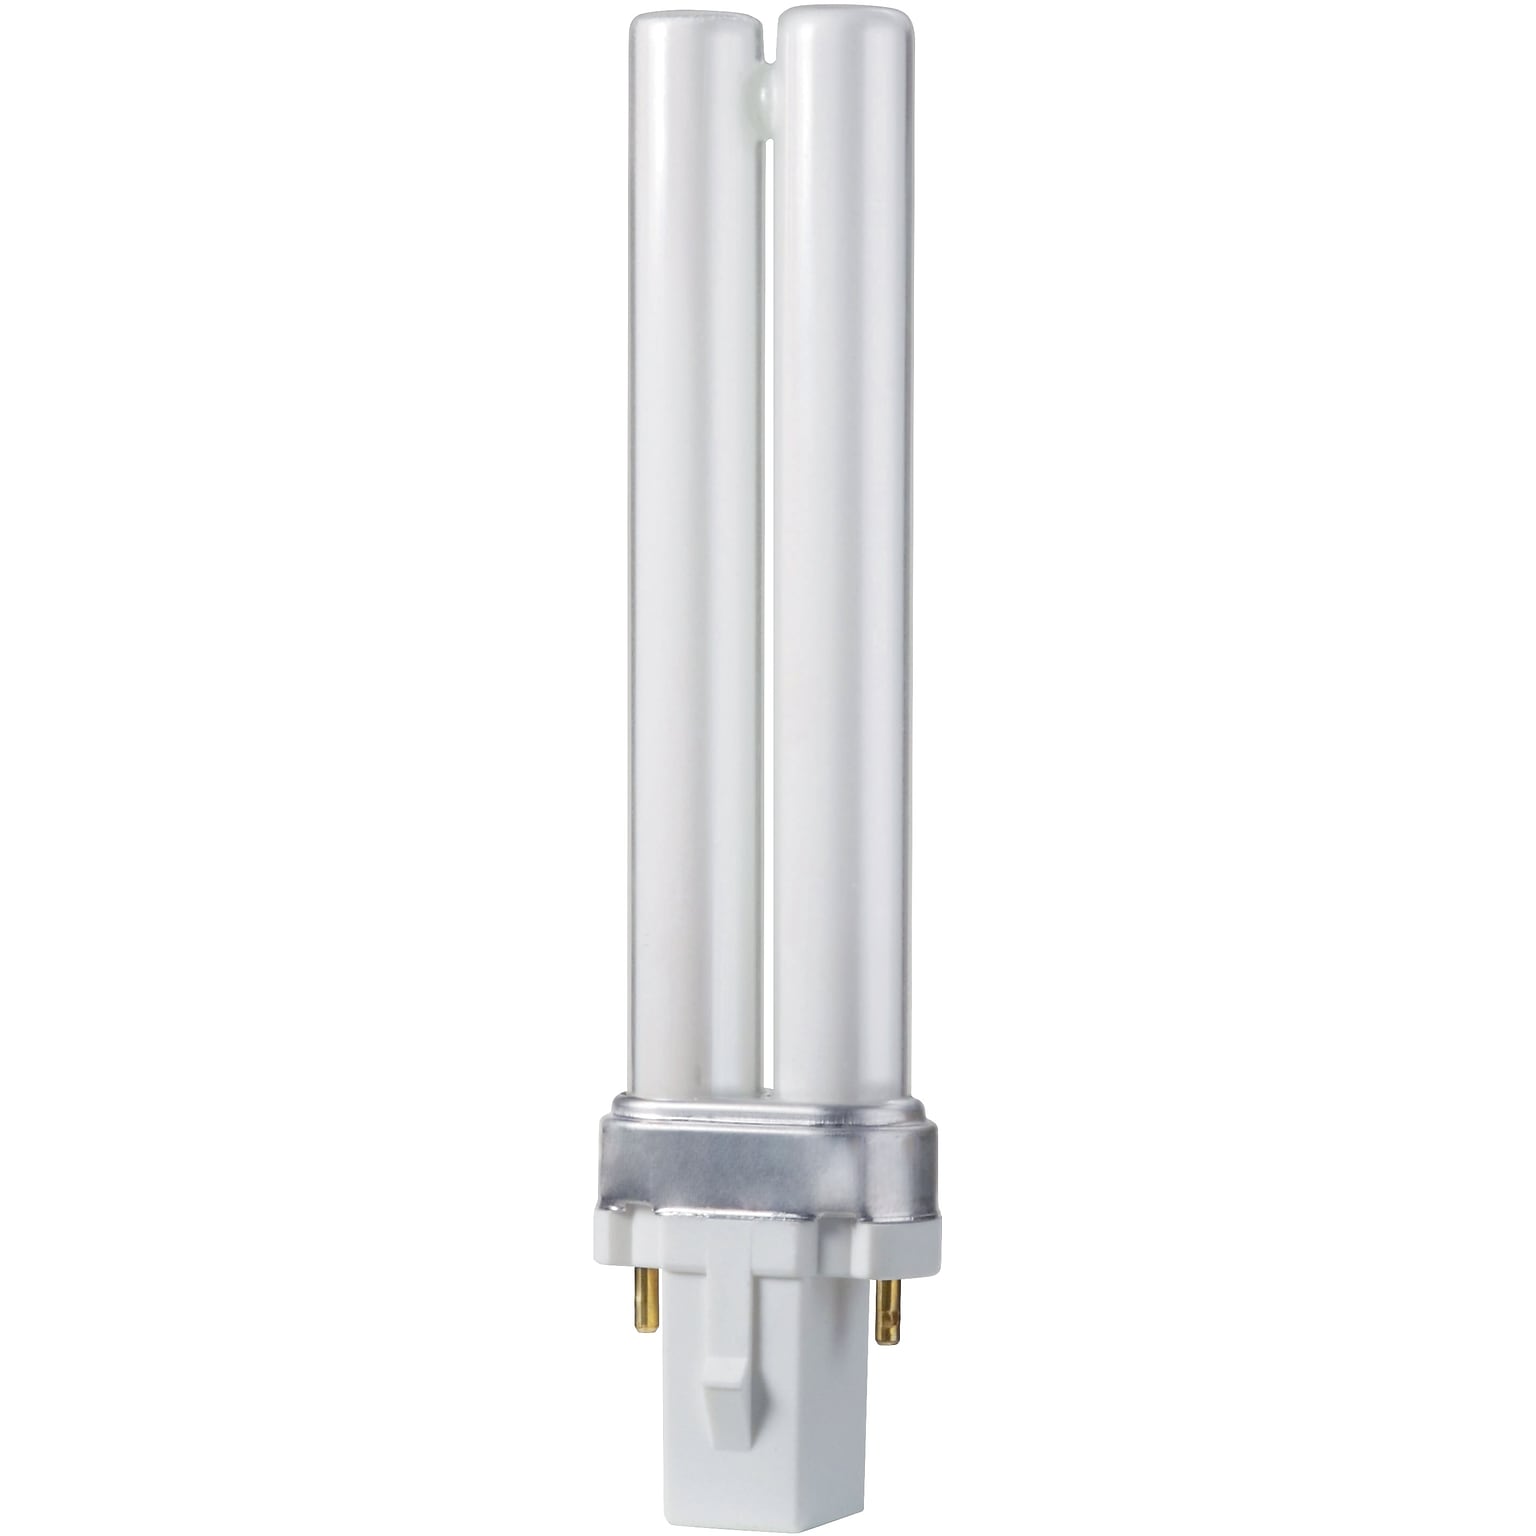 Philips Compact Fluorescent PL-S Lamp, 7 Watts, 2-Pin, Cool White, 10PK